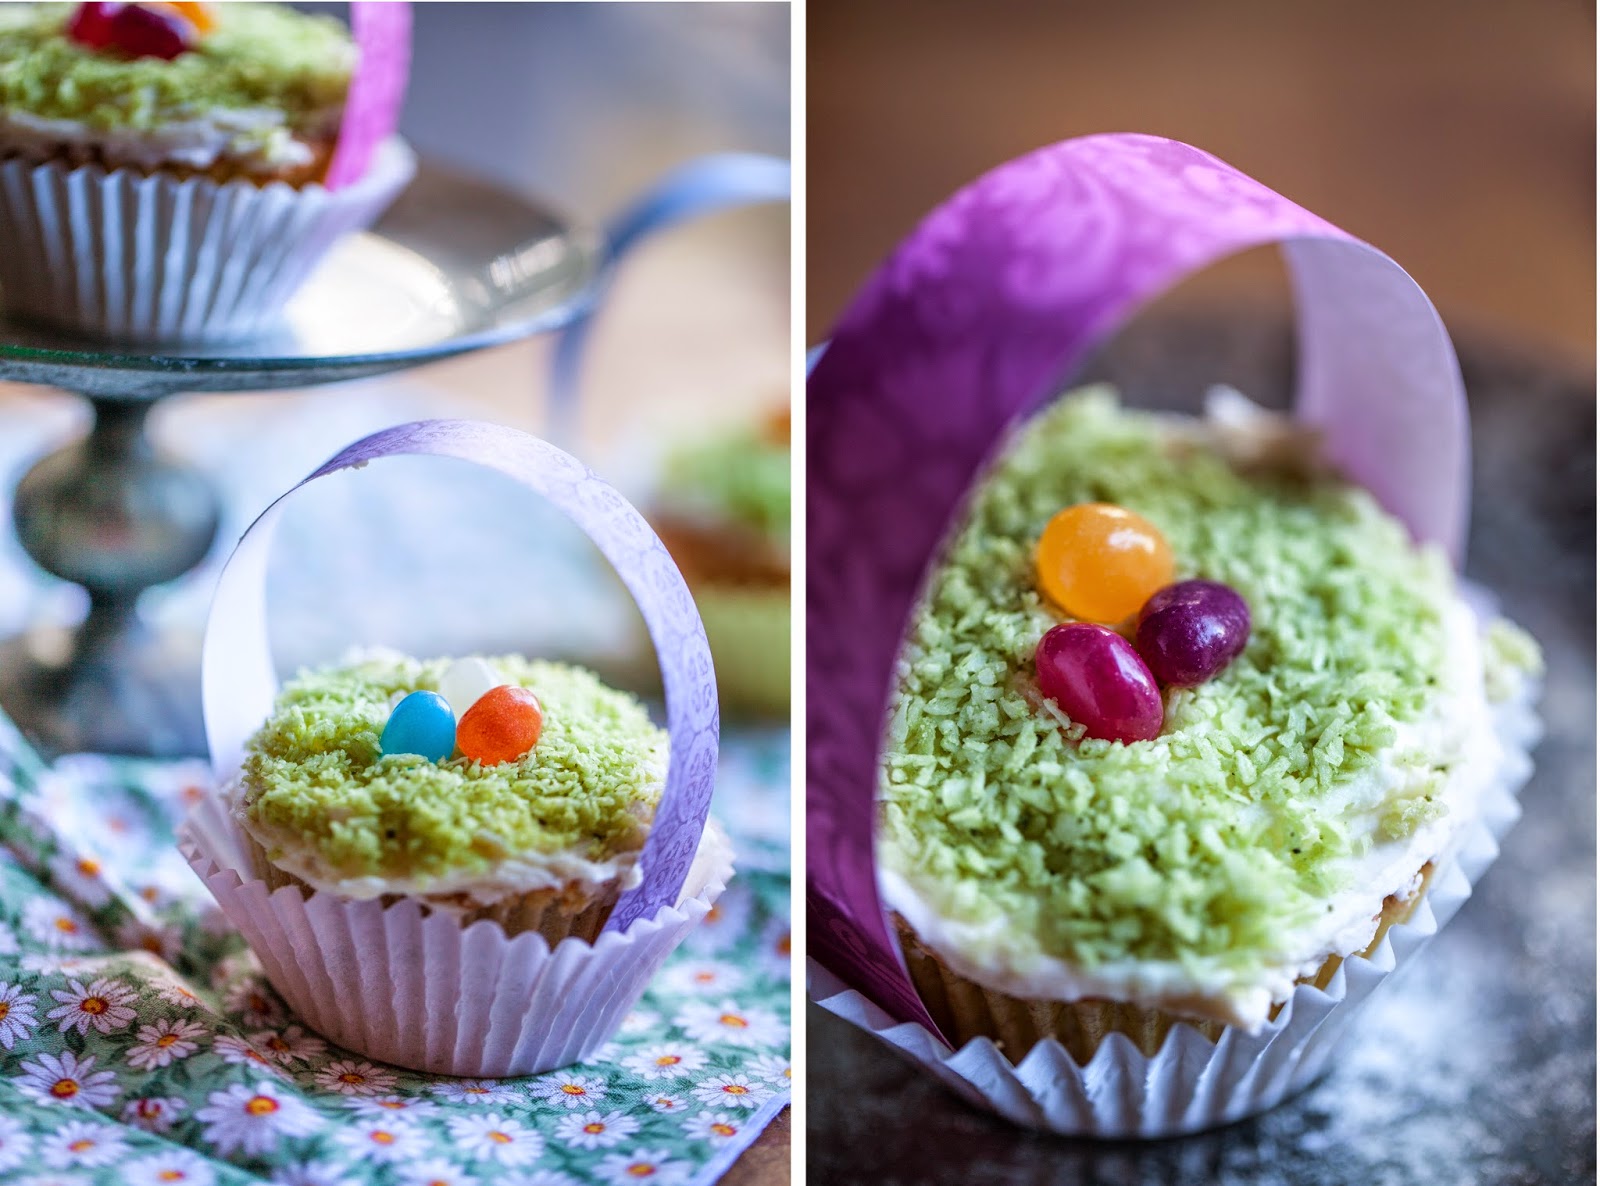 Naturally colored Easter cupcakes lemon and coconut with matcha for green